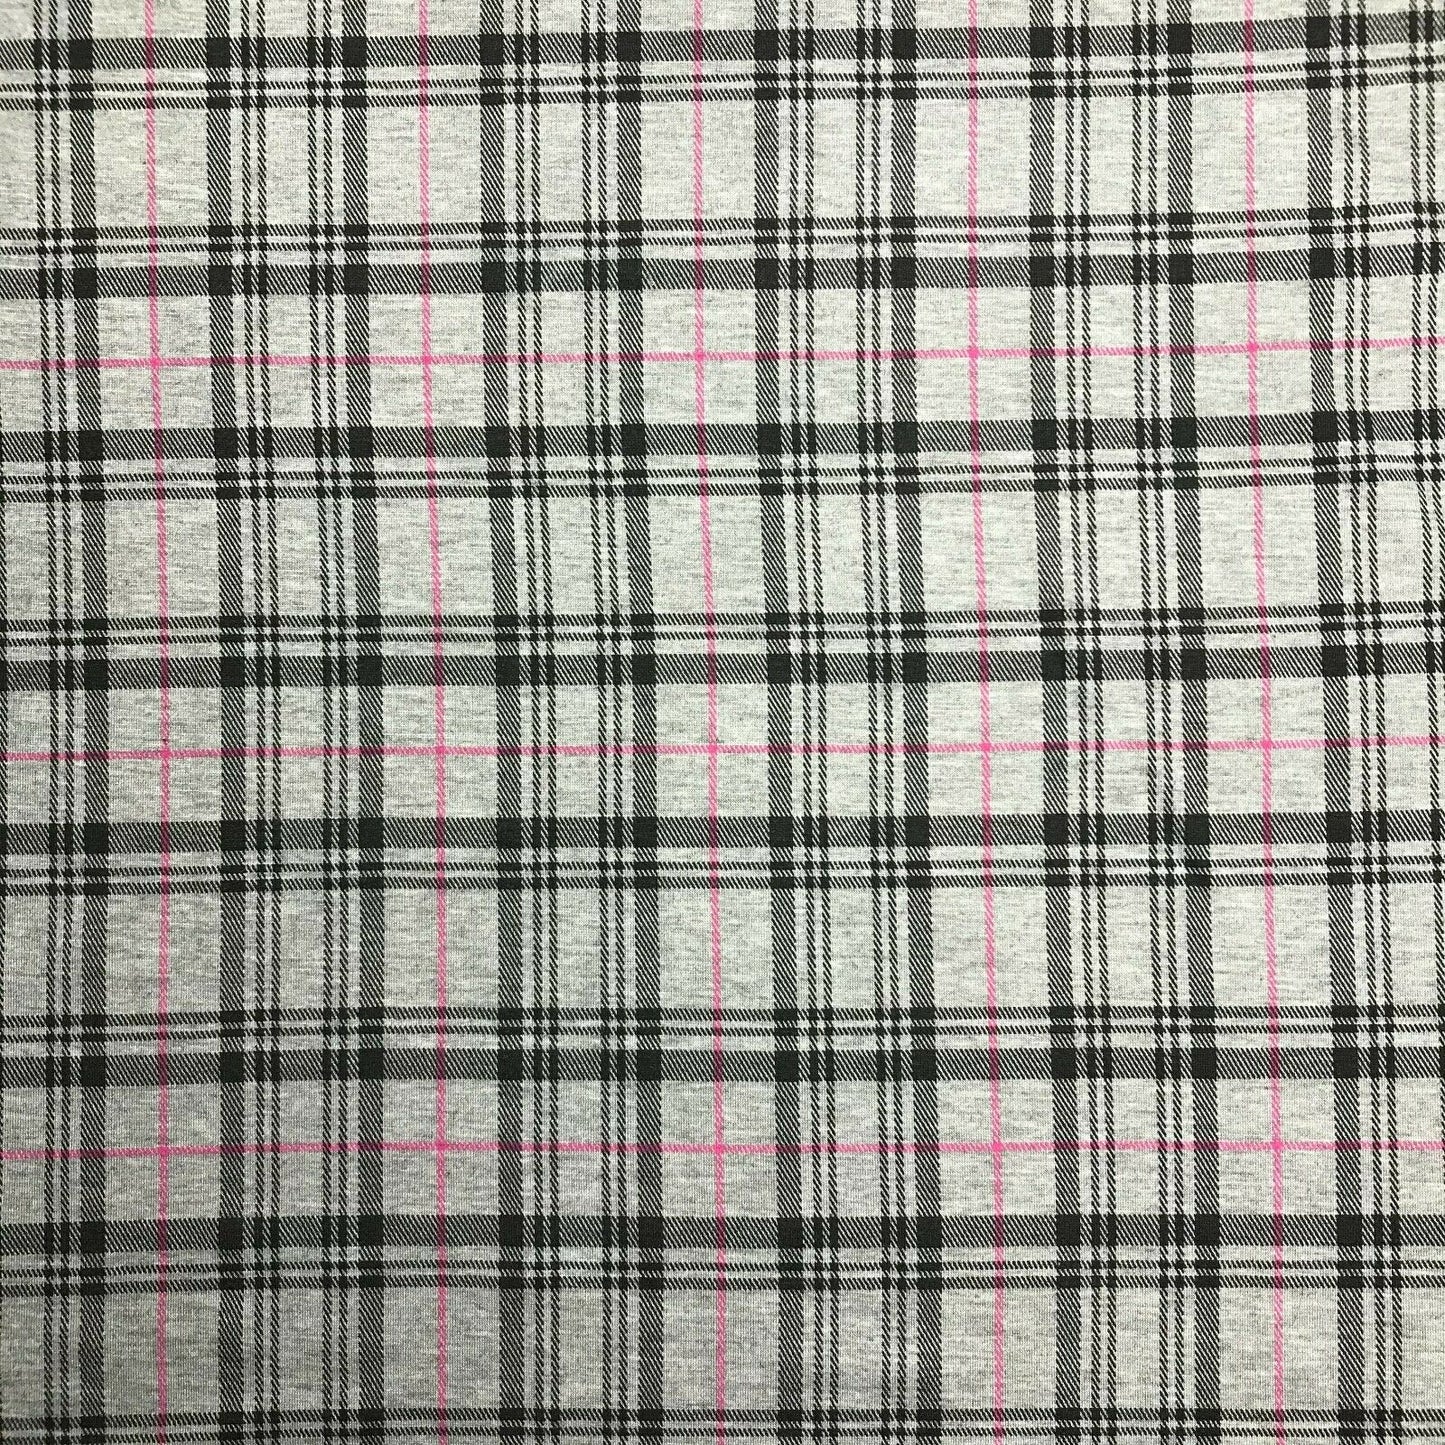 Viscose Blend Jersey Fabric Checked Grey Melange Colour Sold By The Metre A1-116